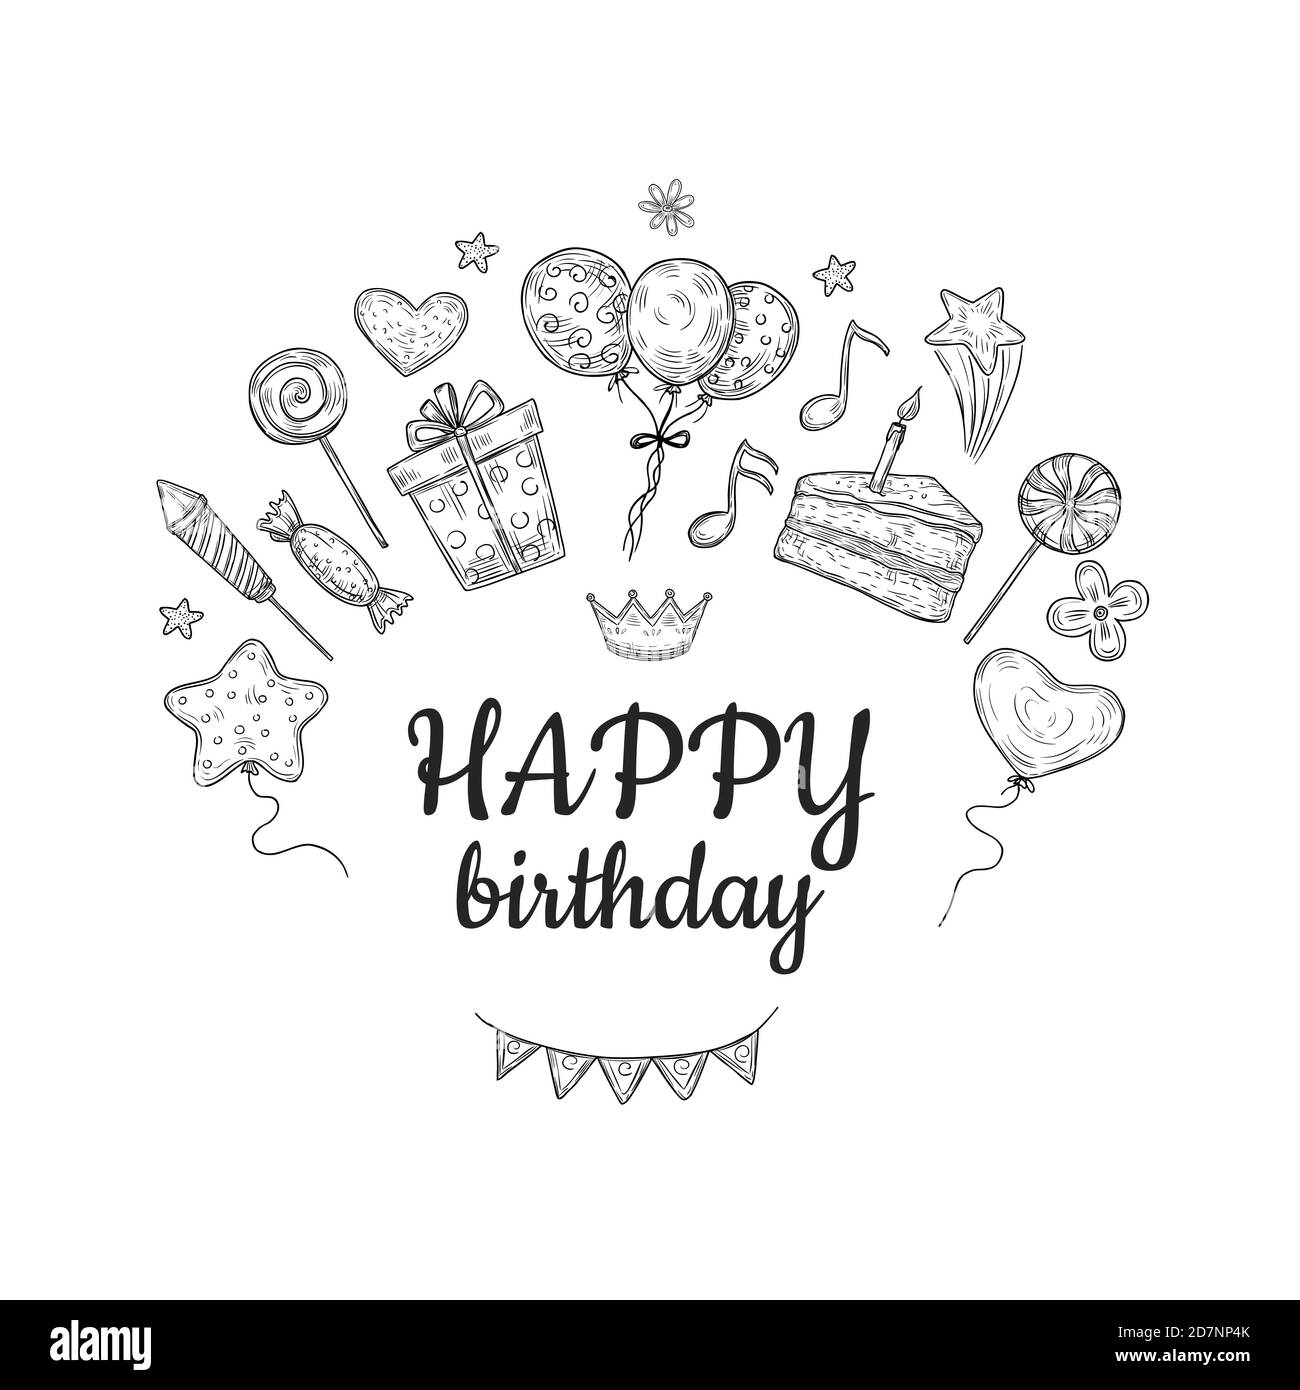 Happy birthday sketch background. Birthday celebration party drawn cake balloon kids surprise holiday doodle vector vintage texture. Illustration of happy birthday sketch poster with celebrate element Stock Vector